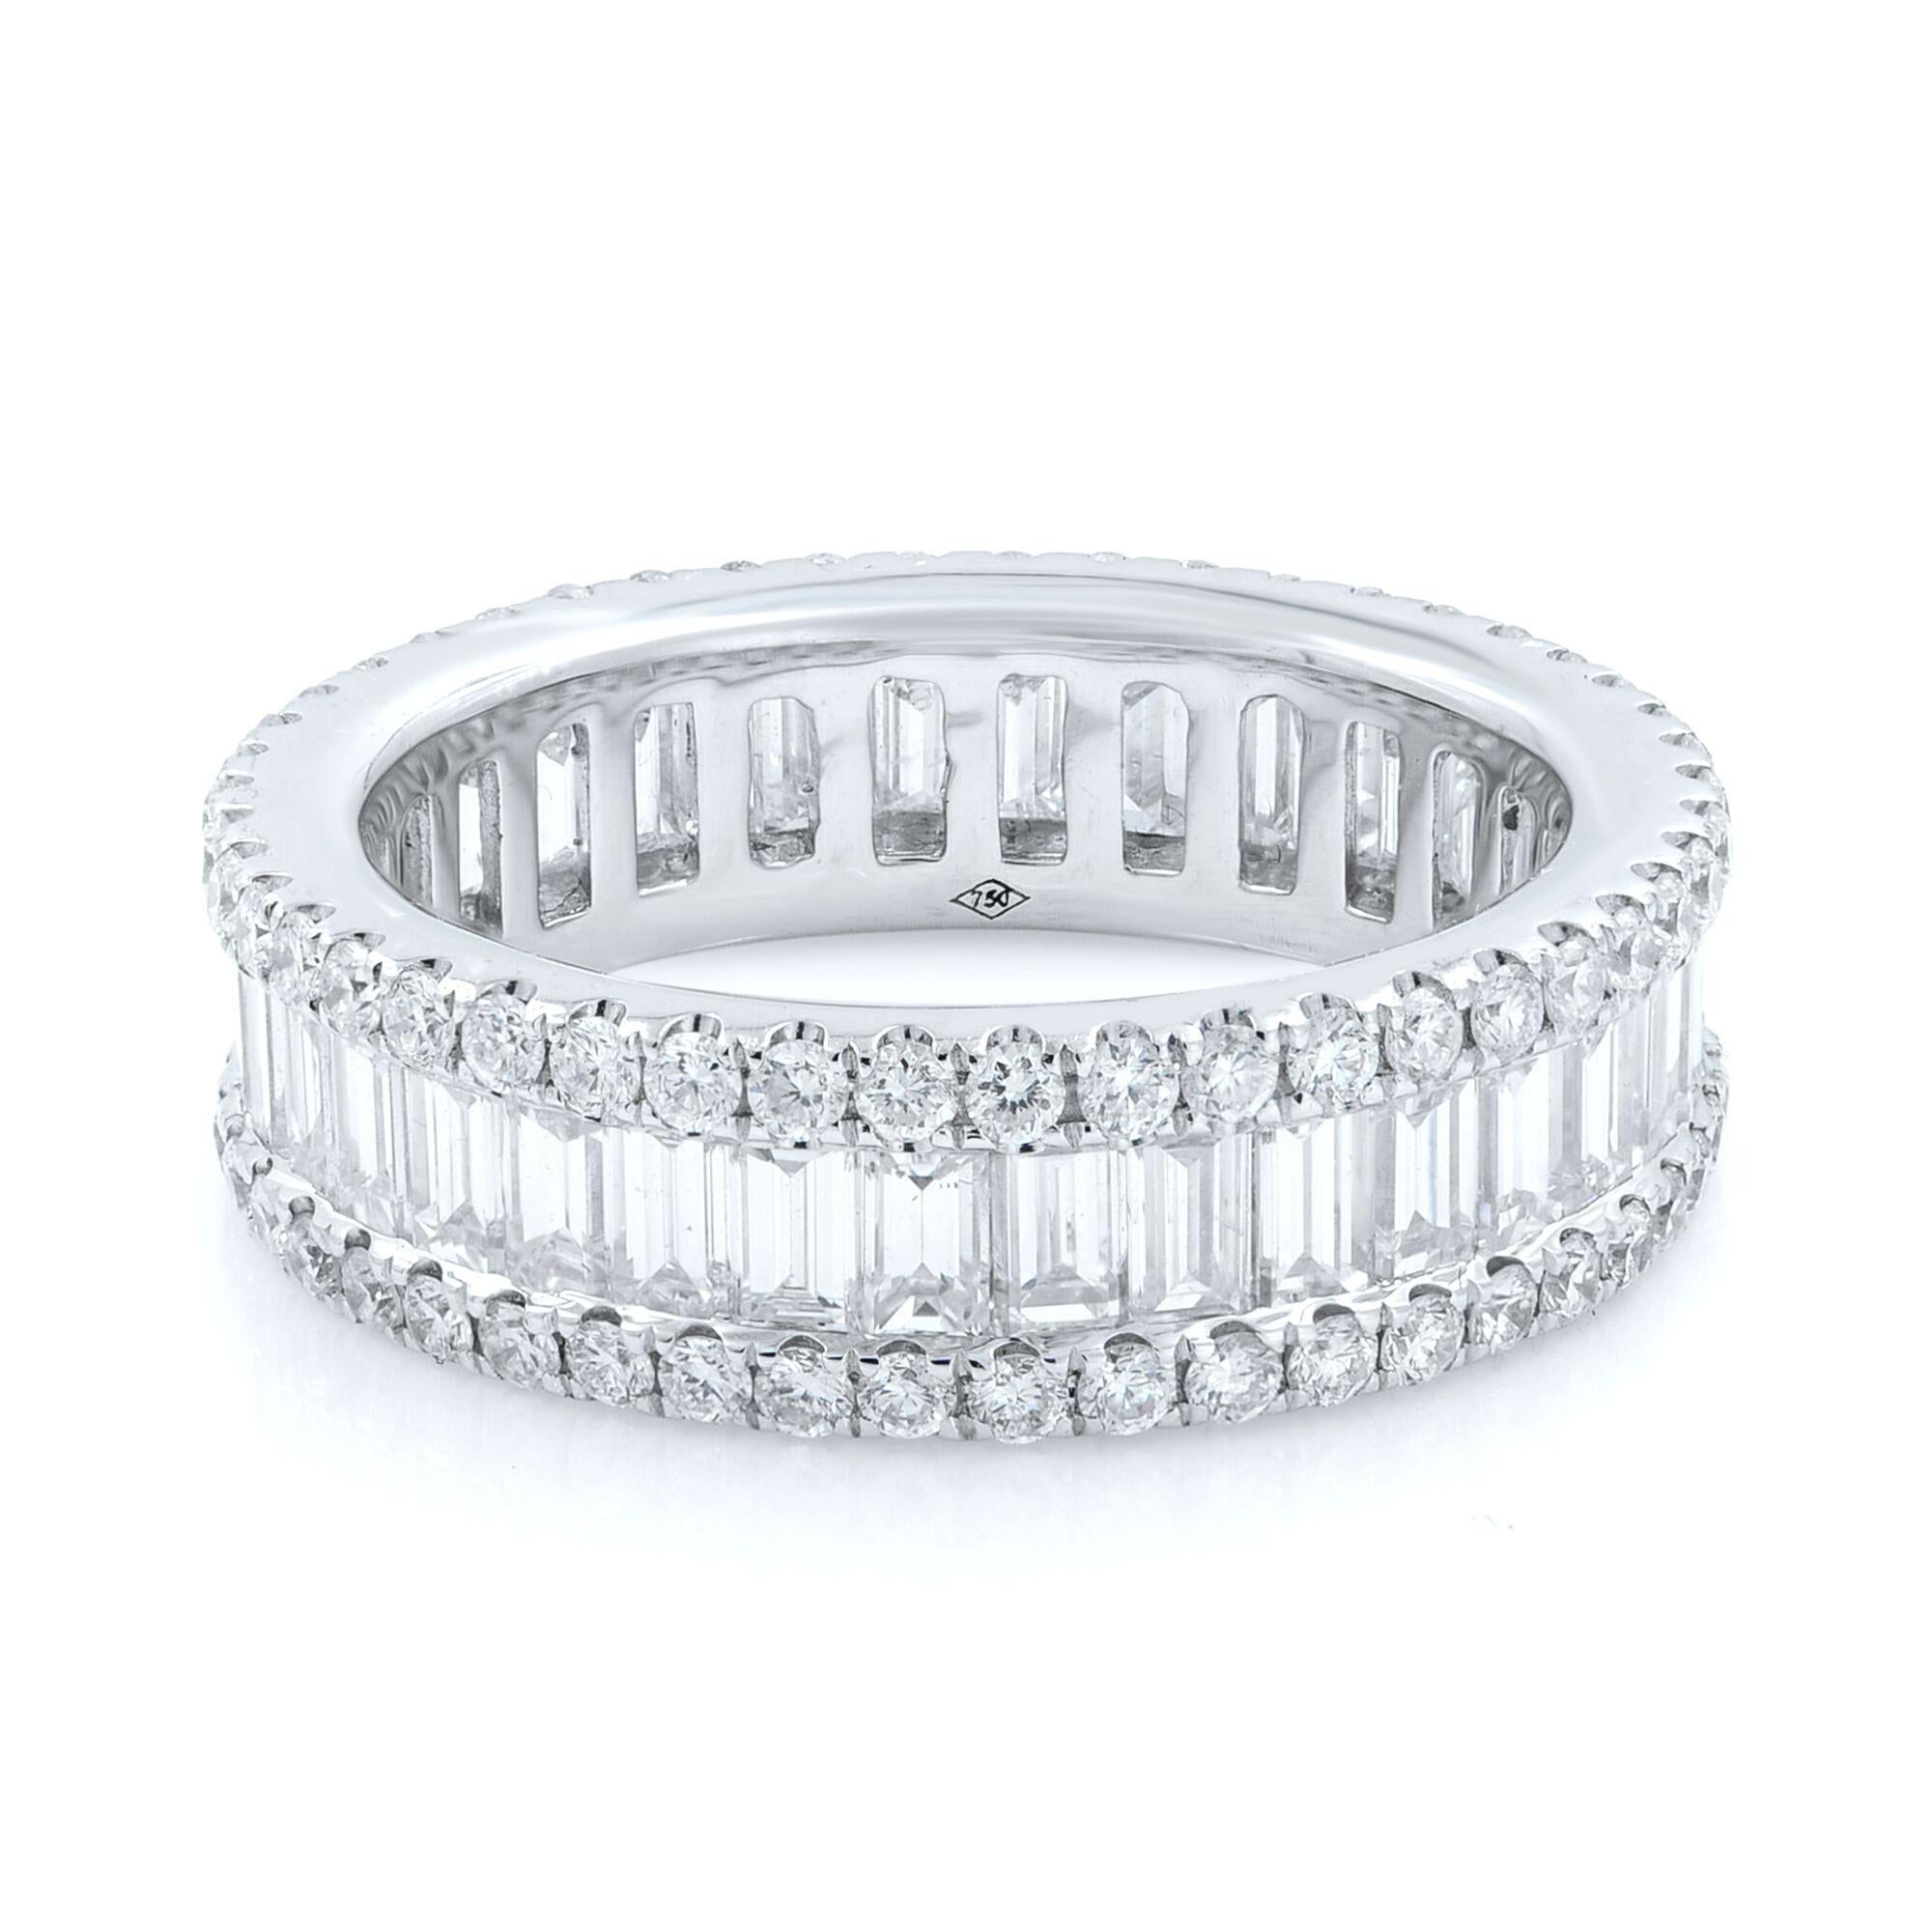 The channel set full eternity was crafted with hand selected baguette cut and round pave cut diamonds weighing 3.44ct in total, beautifully set in 18K white gold. 
Total weight: 4.7
Size: 6.5